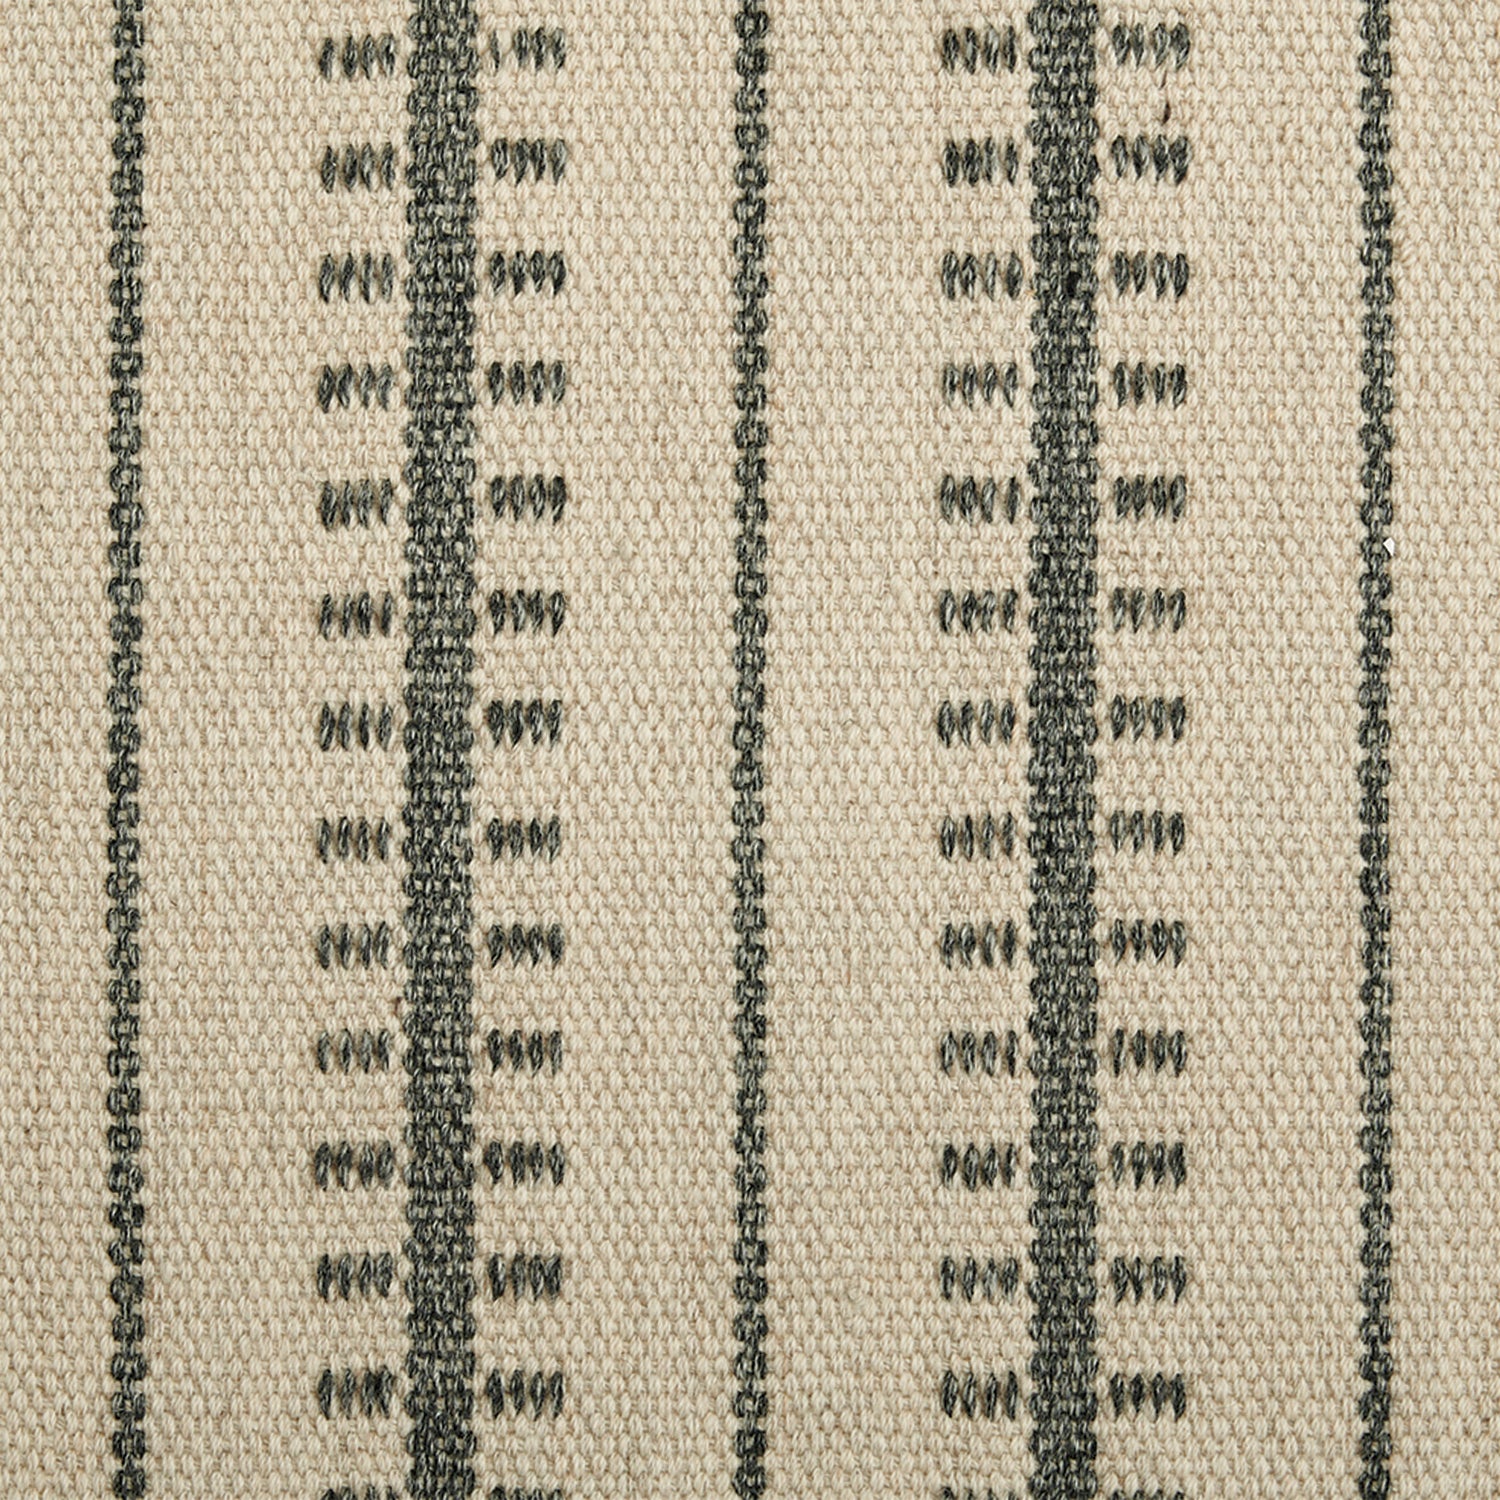 Wool broadloom carpet swatch in a ticked stripe weave in charcoal and cream.